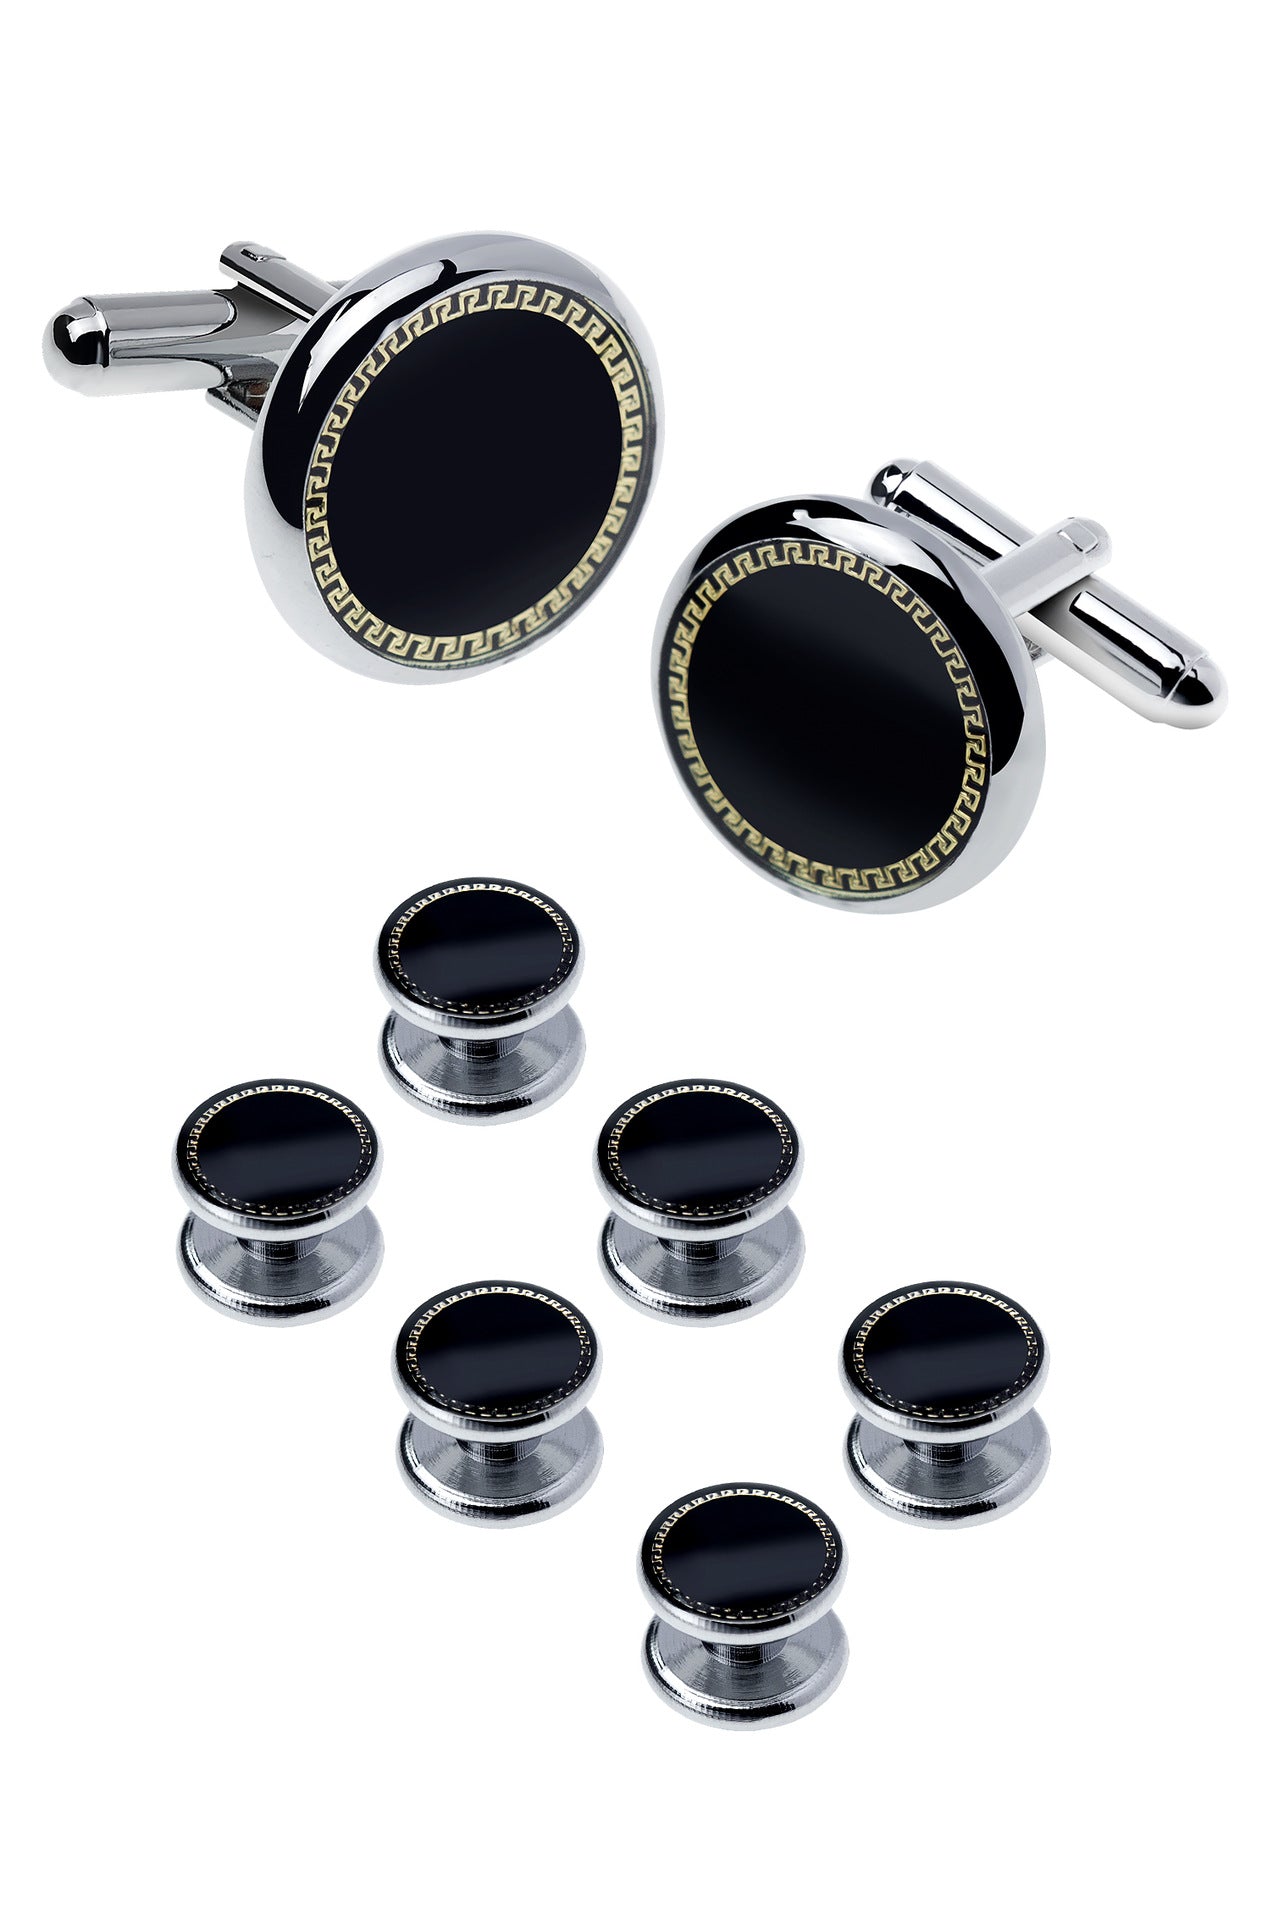 Classic And Fashionable Men's Cufflinks Set